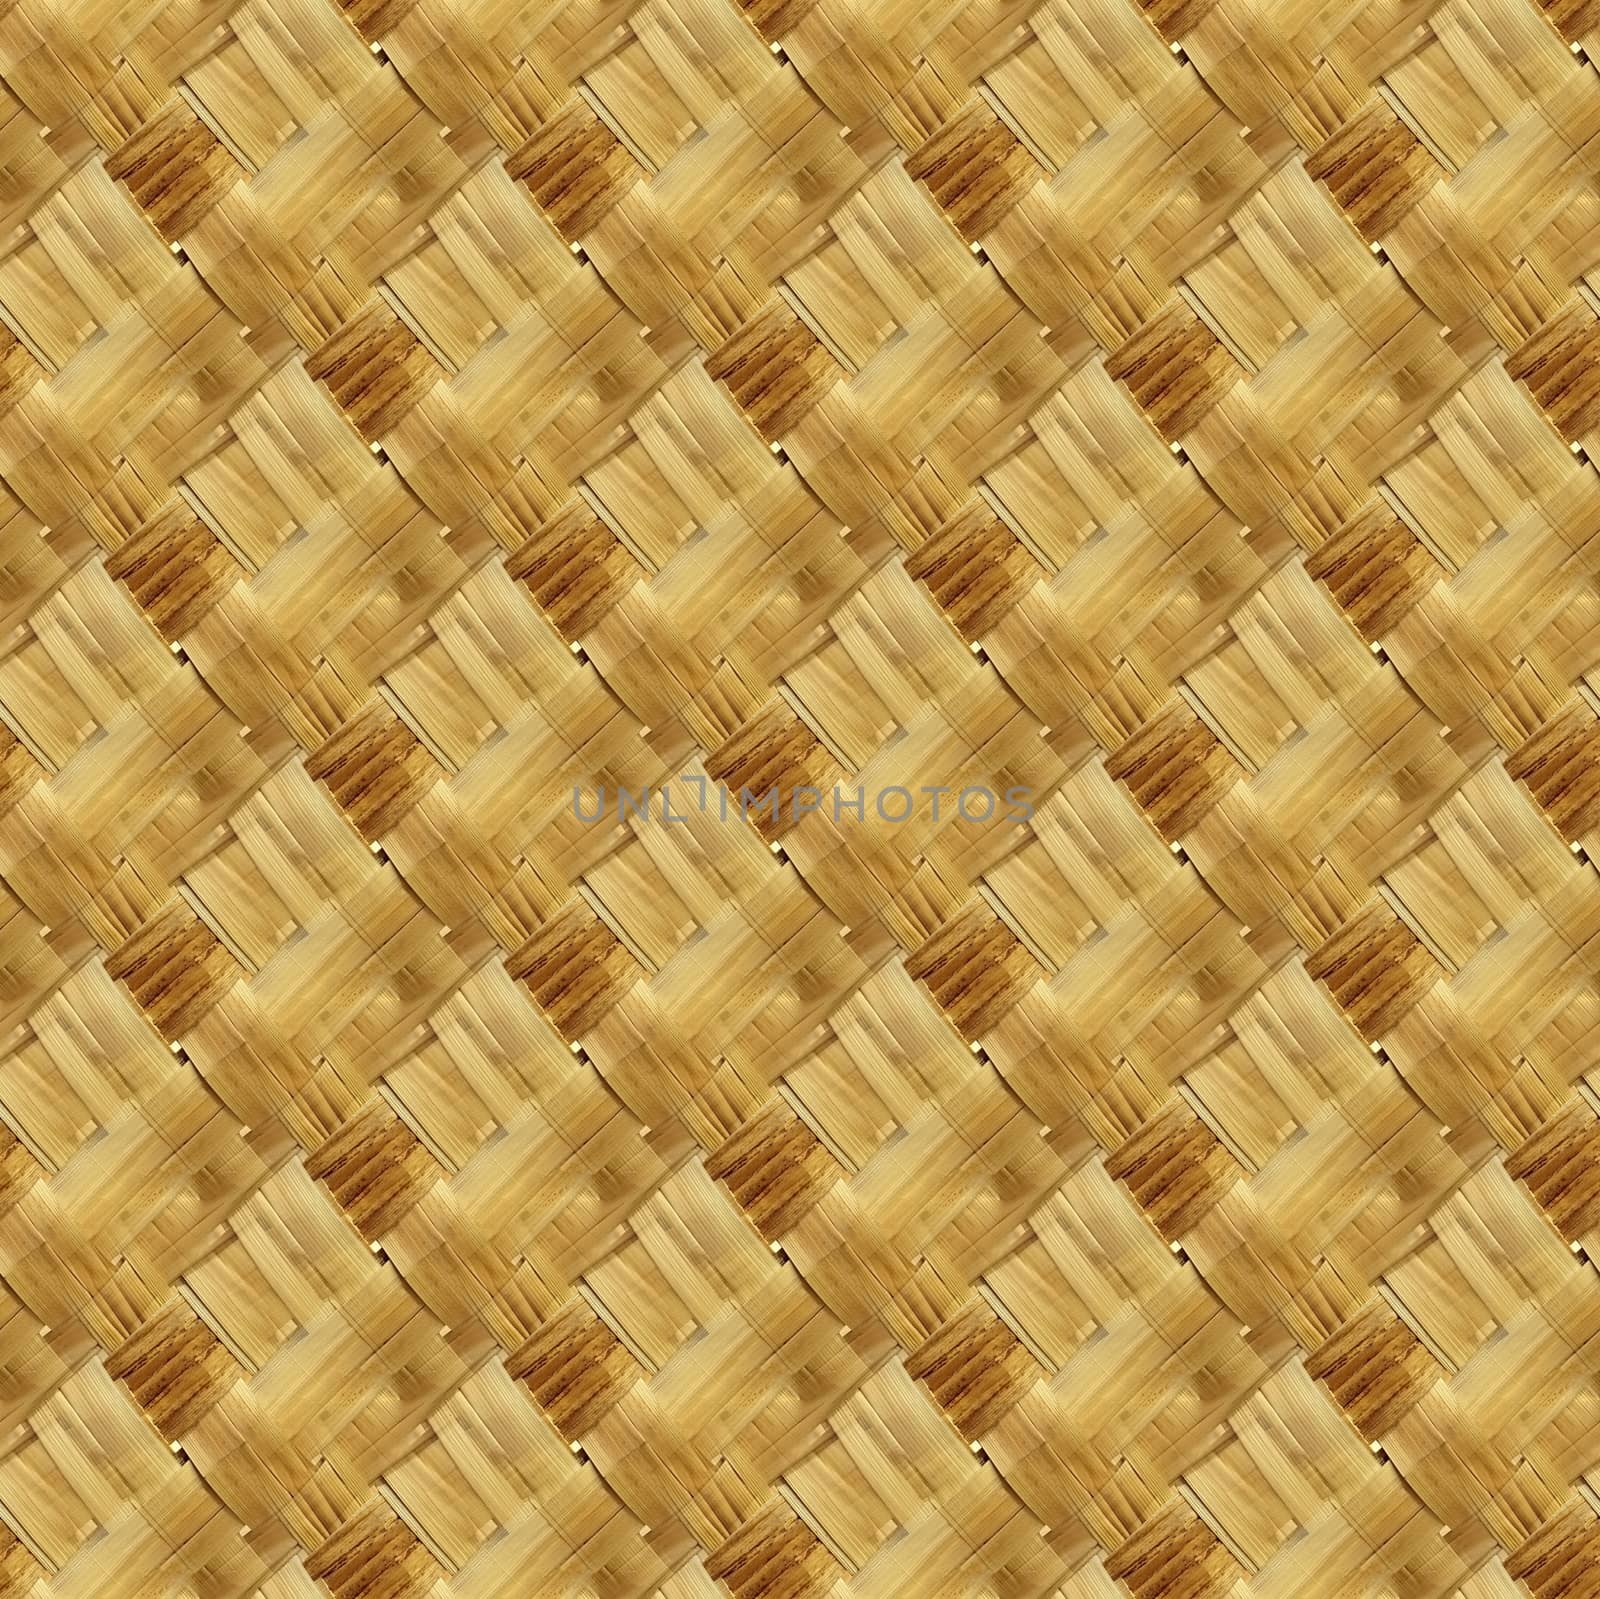 Seamless background of bamboo or rattan texture

